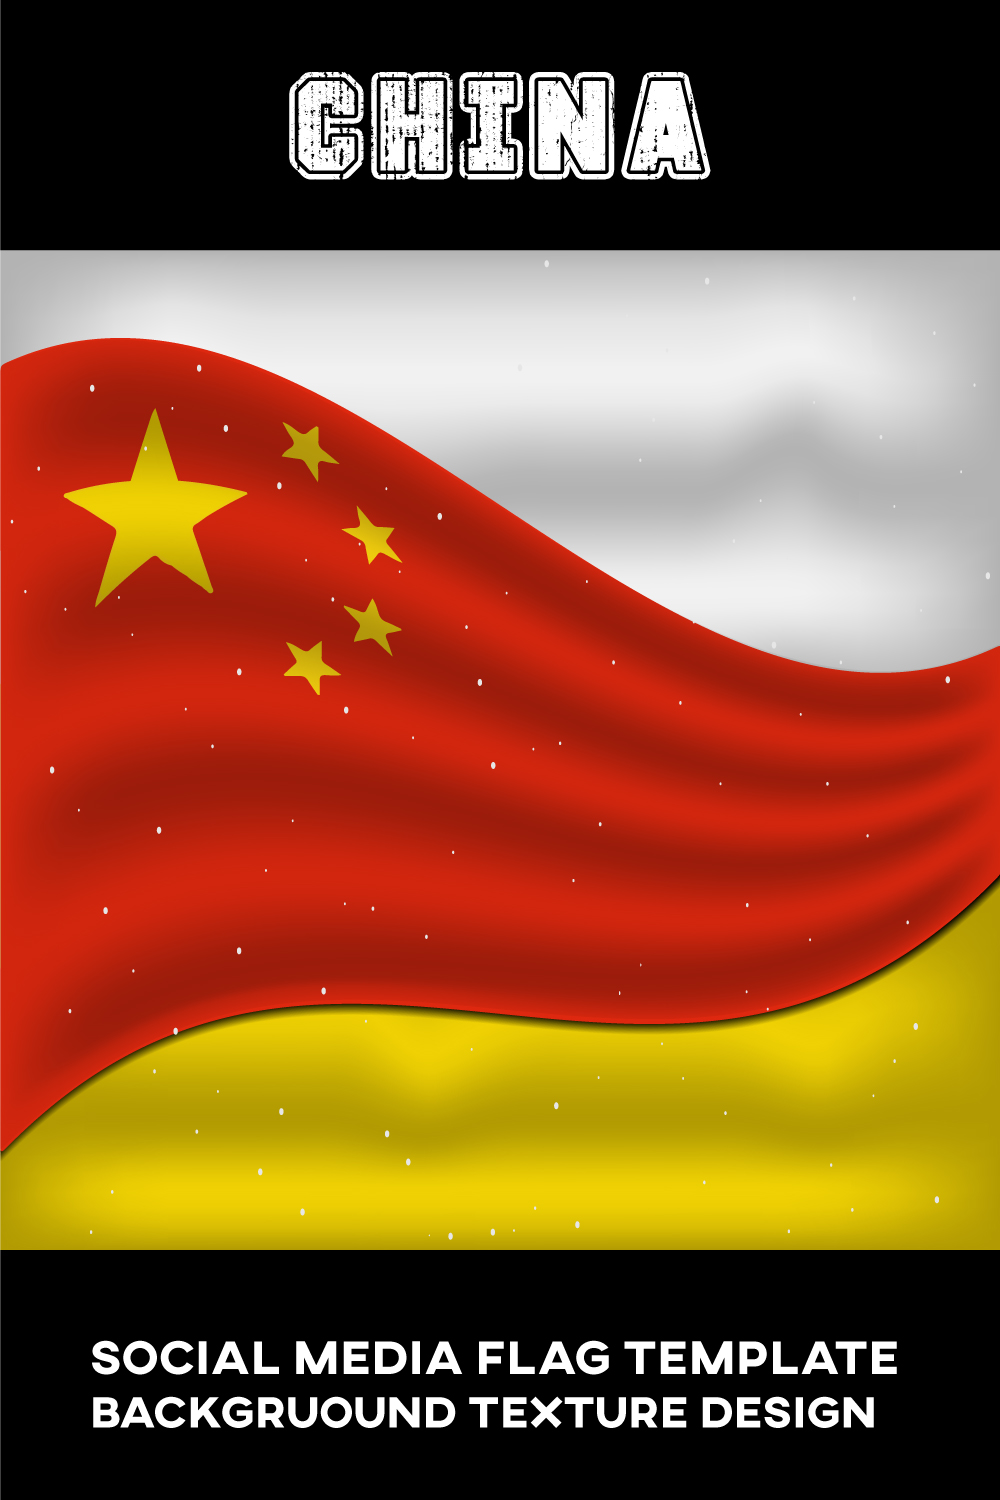 Exquisite image of the flag of china.